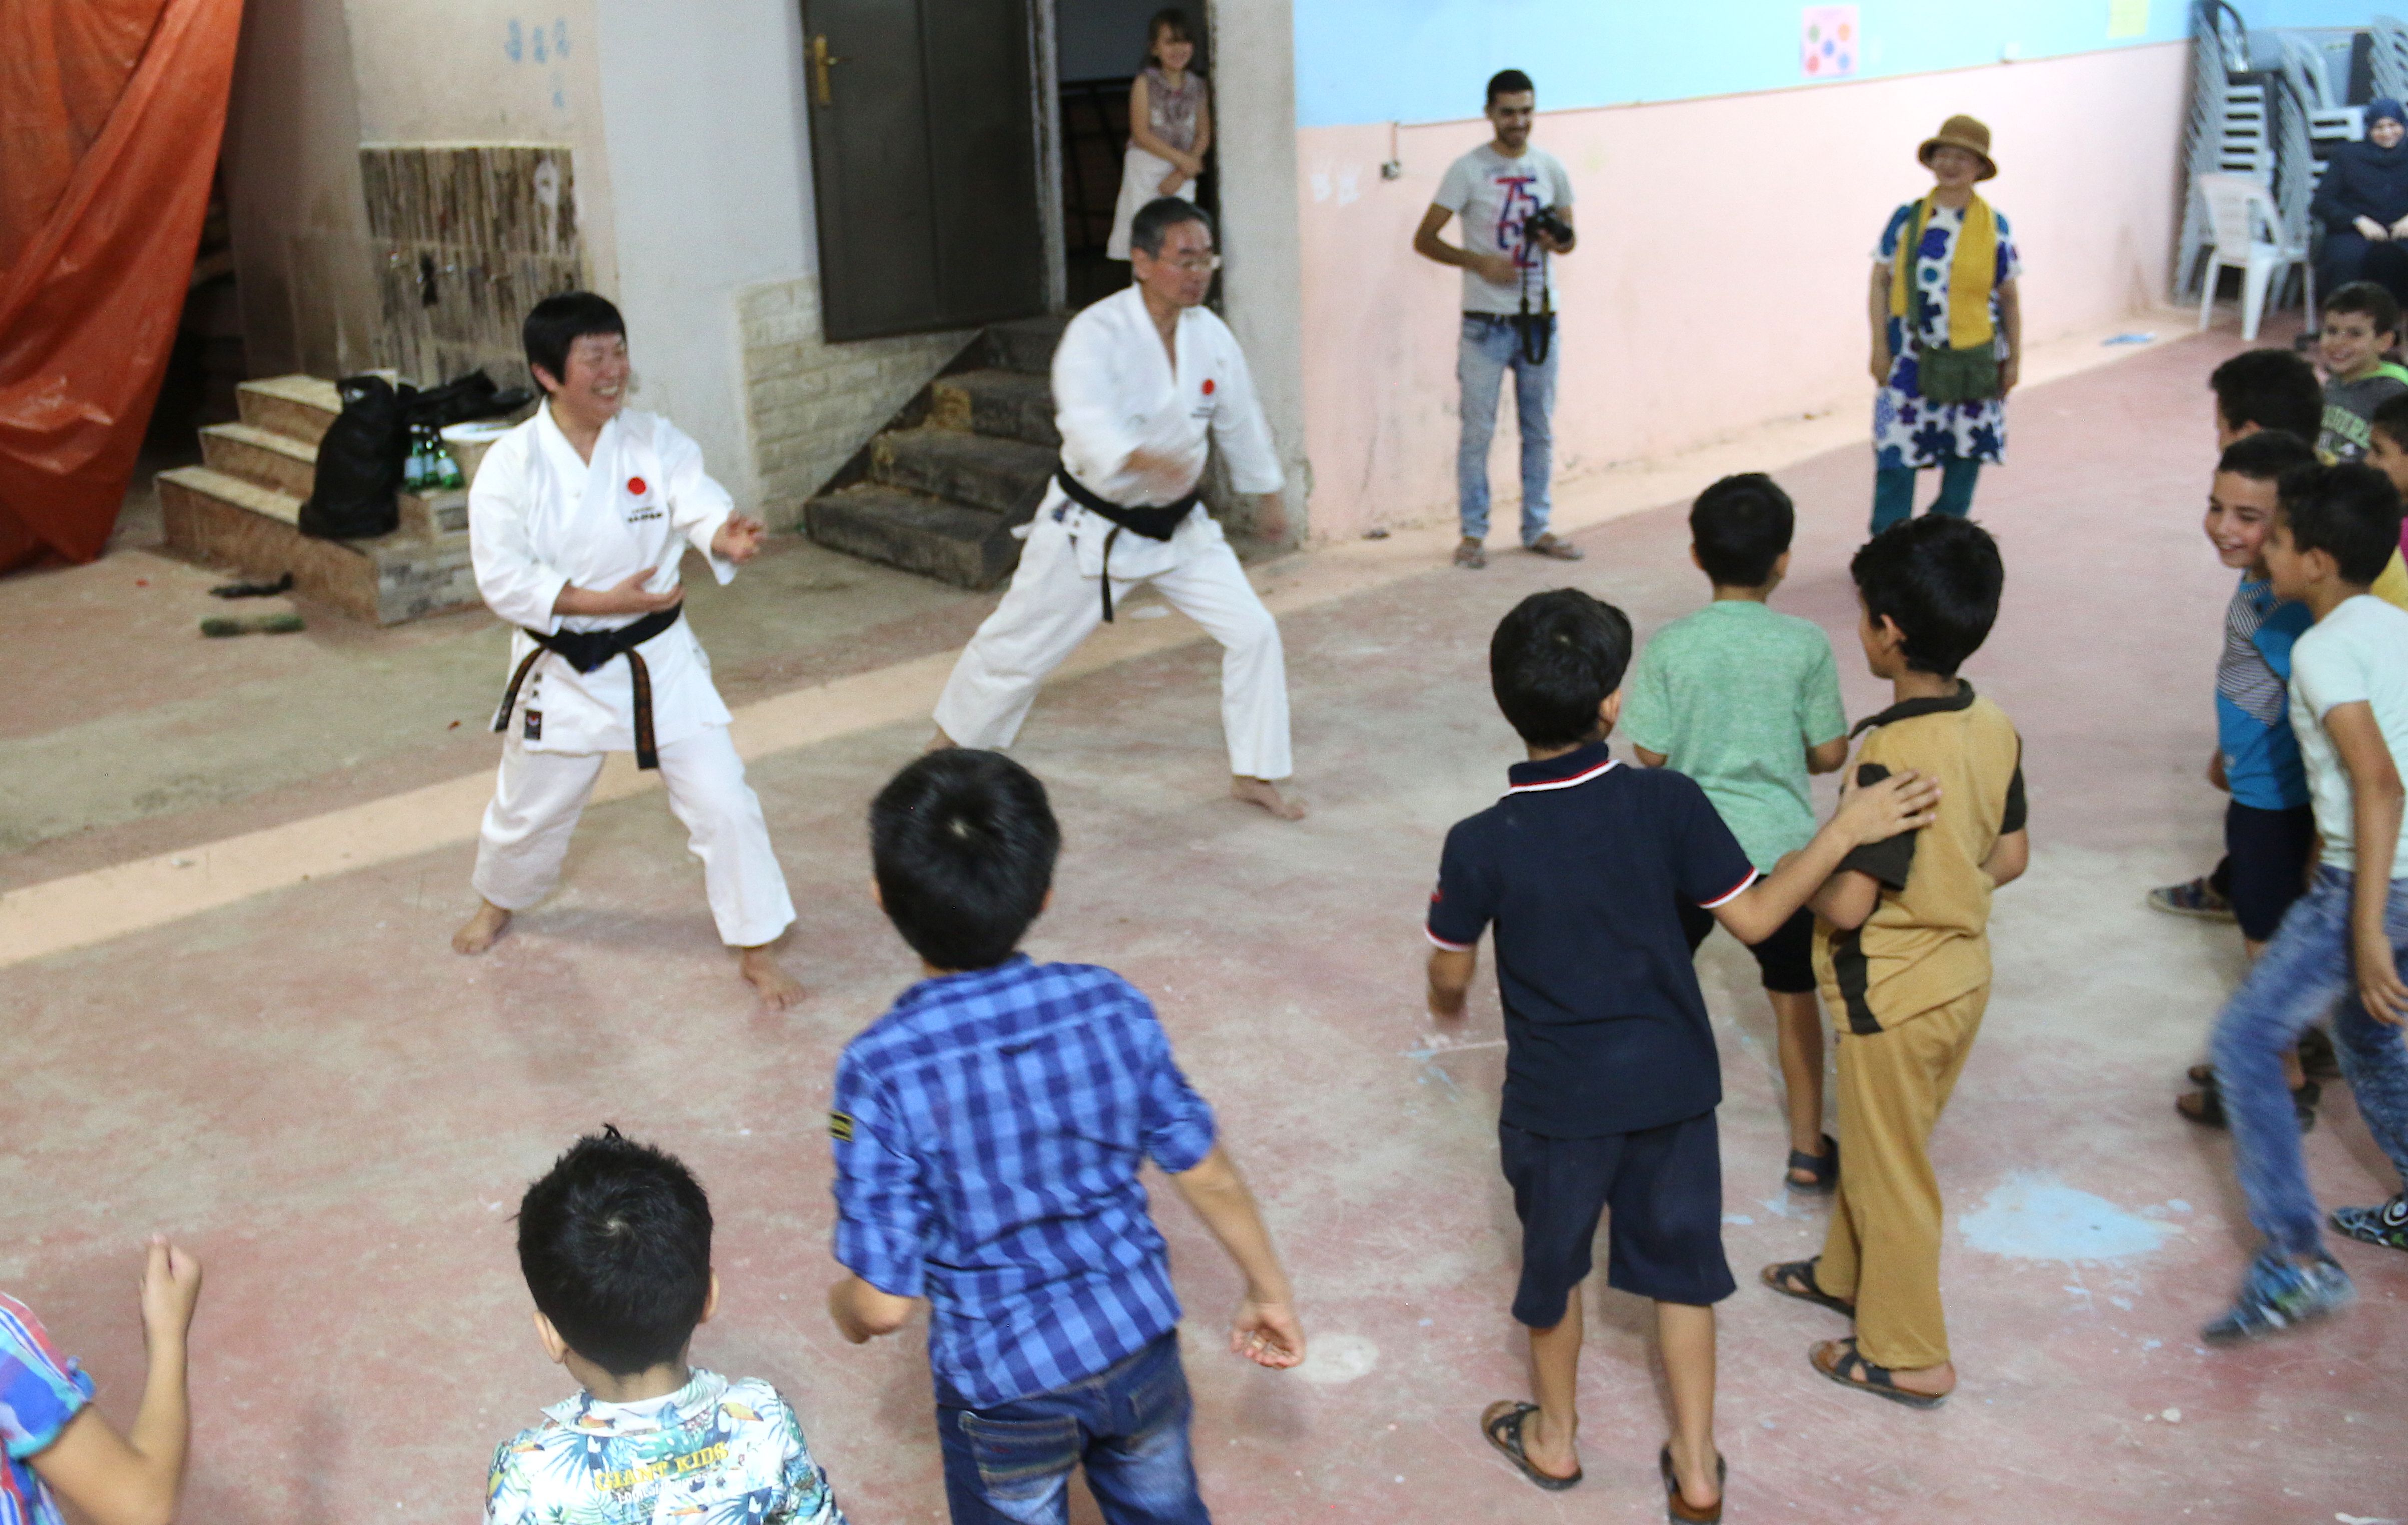 Children relieve stress at Homs League Abroad with various activities. Here they are practicing karate moves with a Japanese volunteer team. Image by Sawsan Morrar. Jordan, 2017.